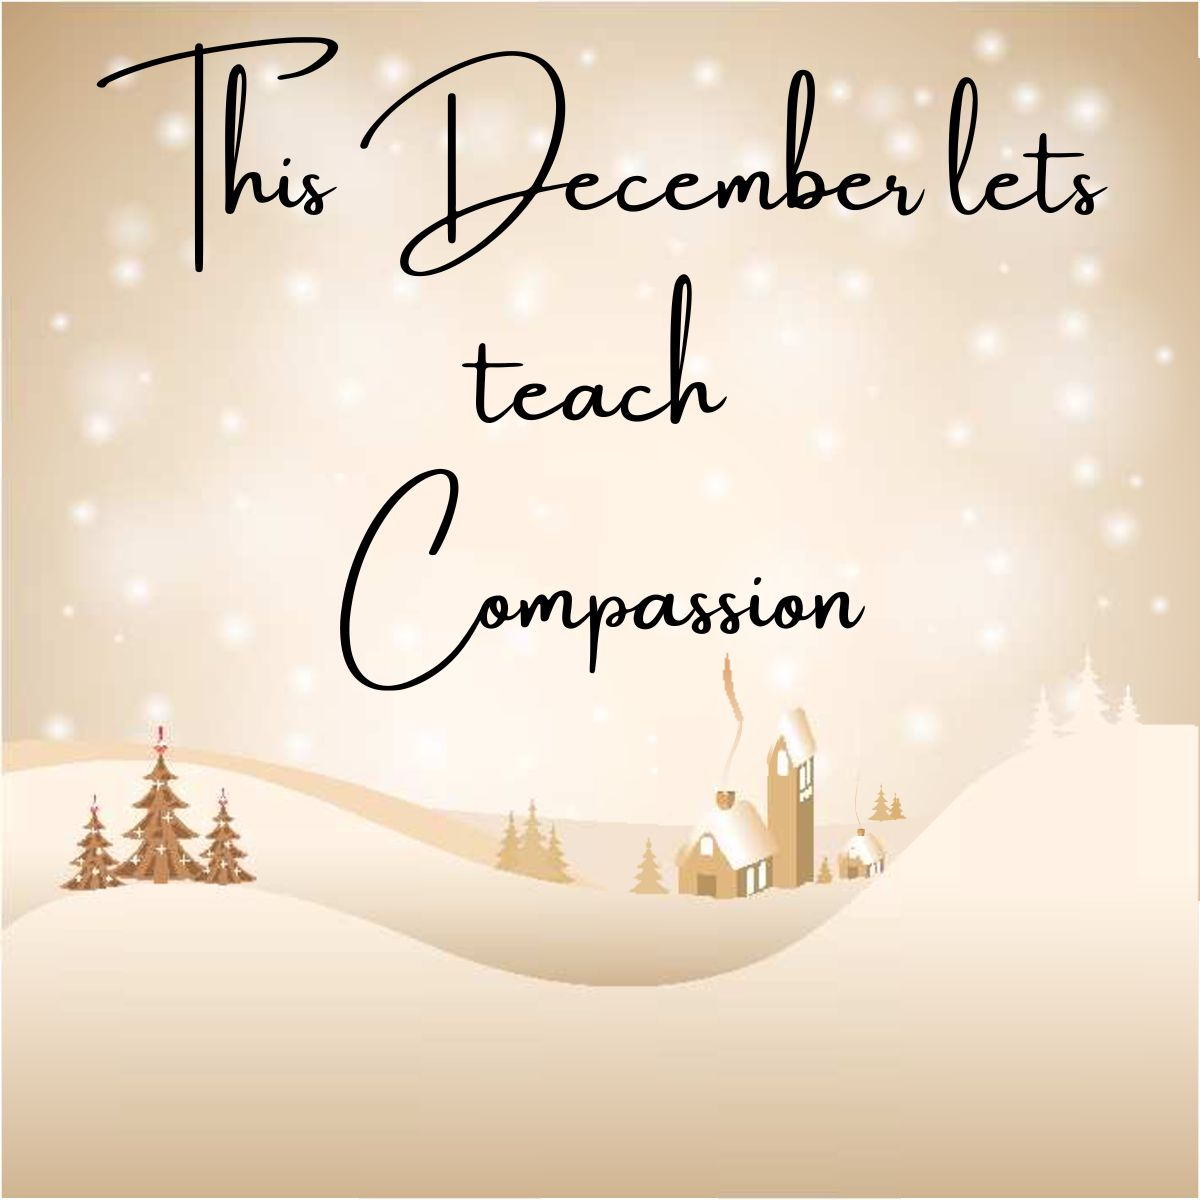 This December let's teach Compassion